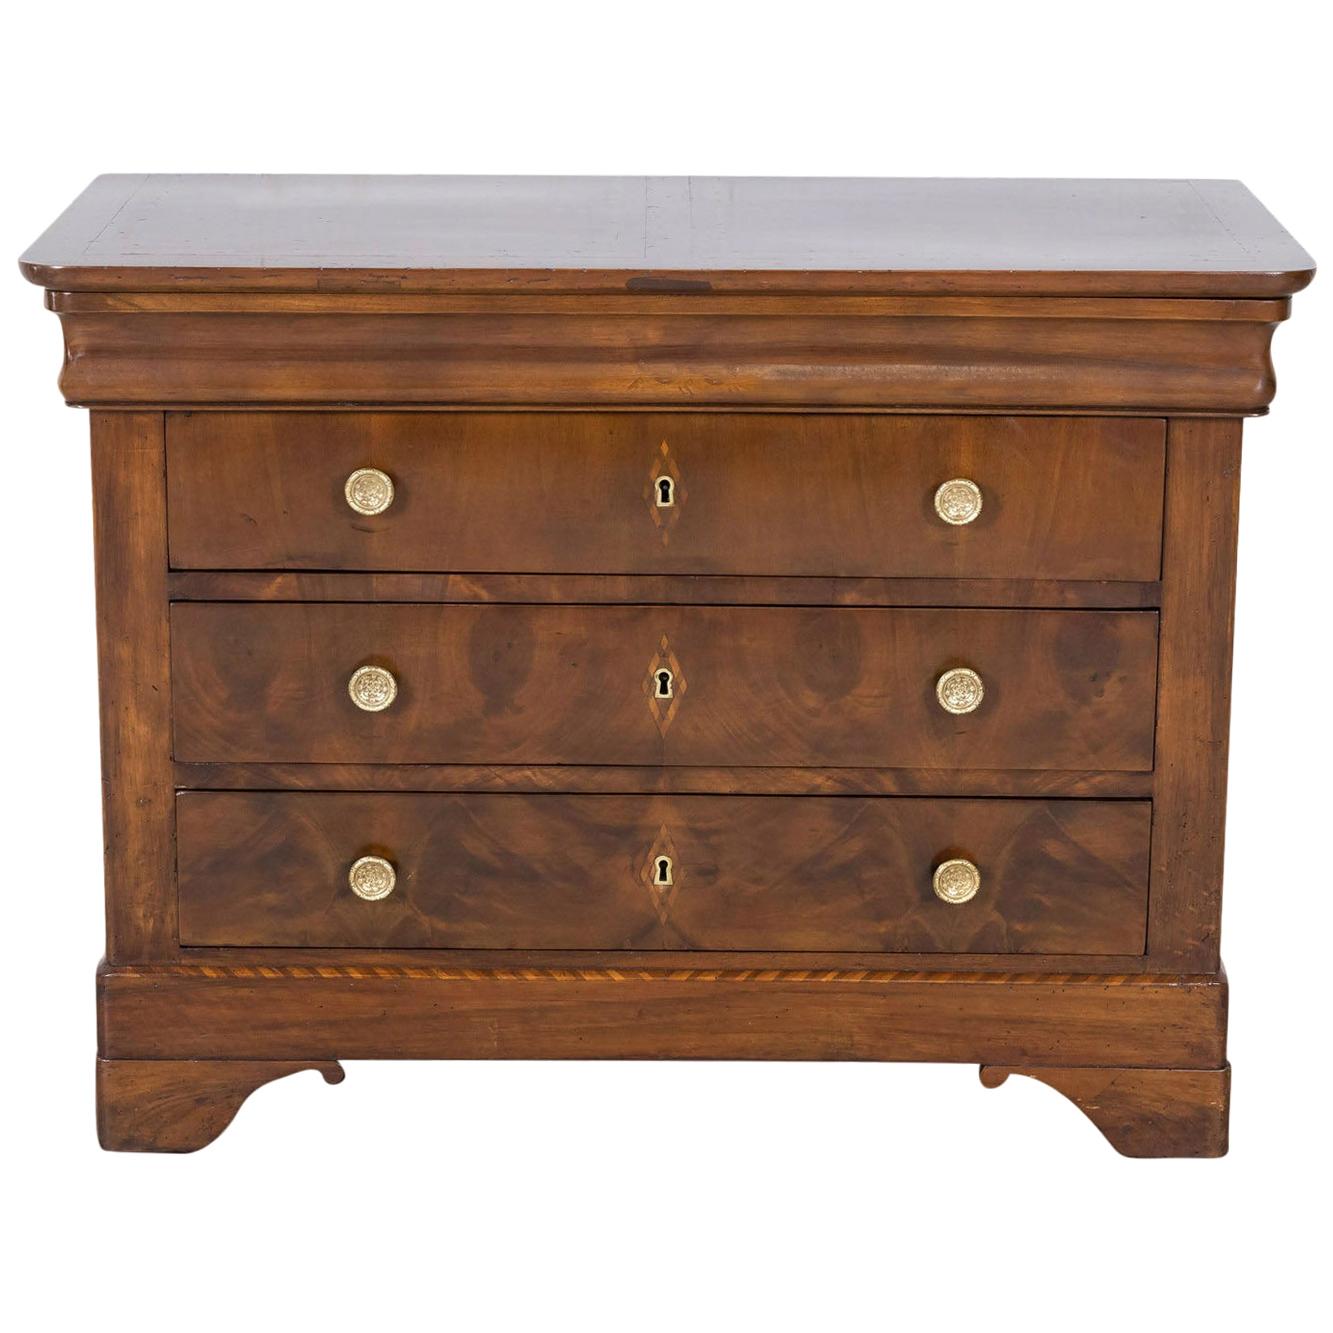 19th Century French Period Louis Philippe Walnut and Fruitwood Parquetry Commode